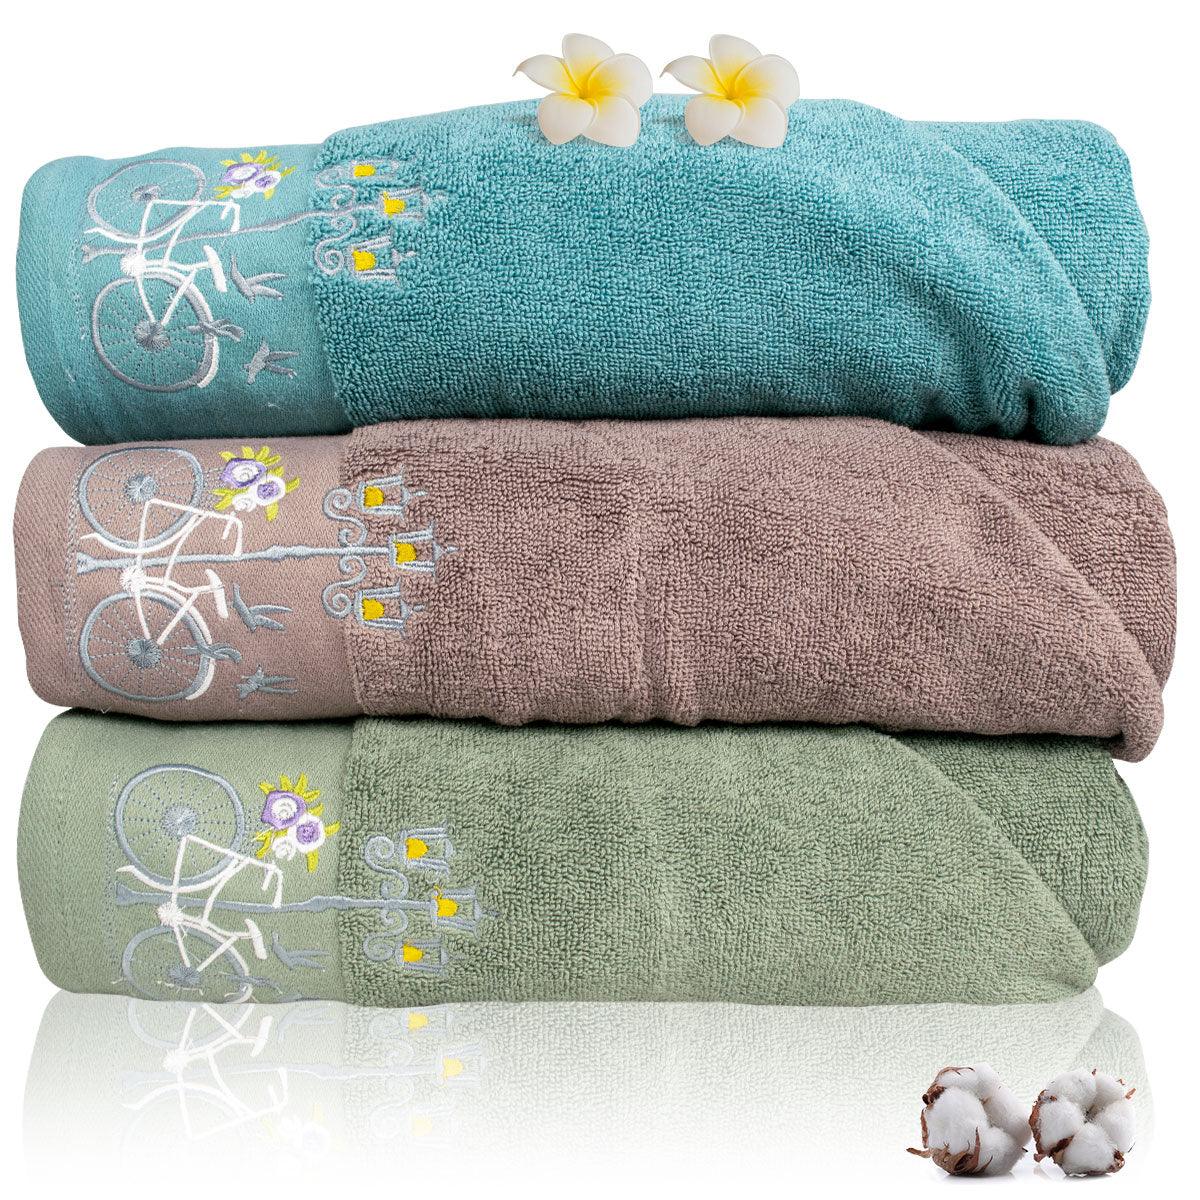 540 GSM Martin Hand Towel Set Of 3 | Ultra Soft & Highly Absorbent Towels | Green, Blugrn, Turquoise